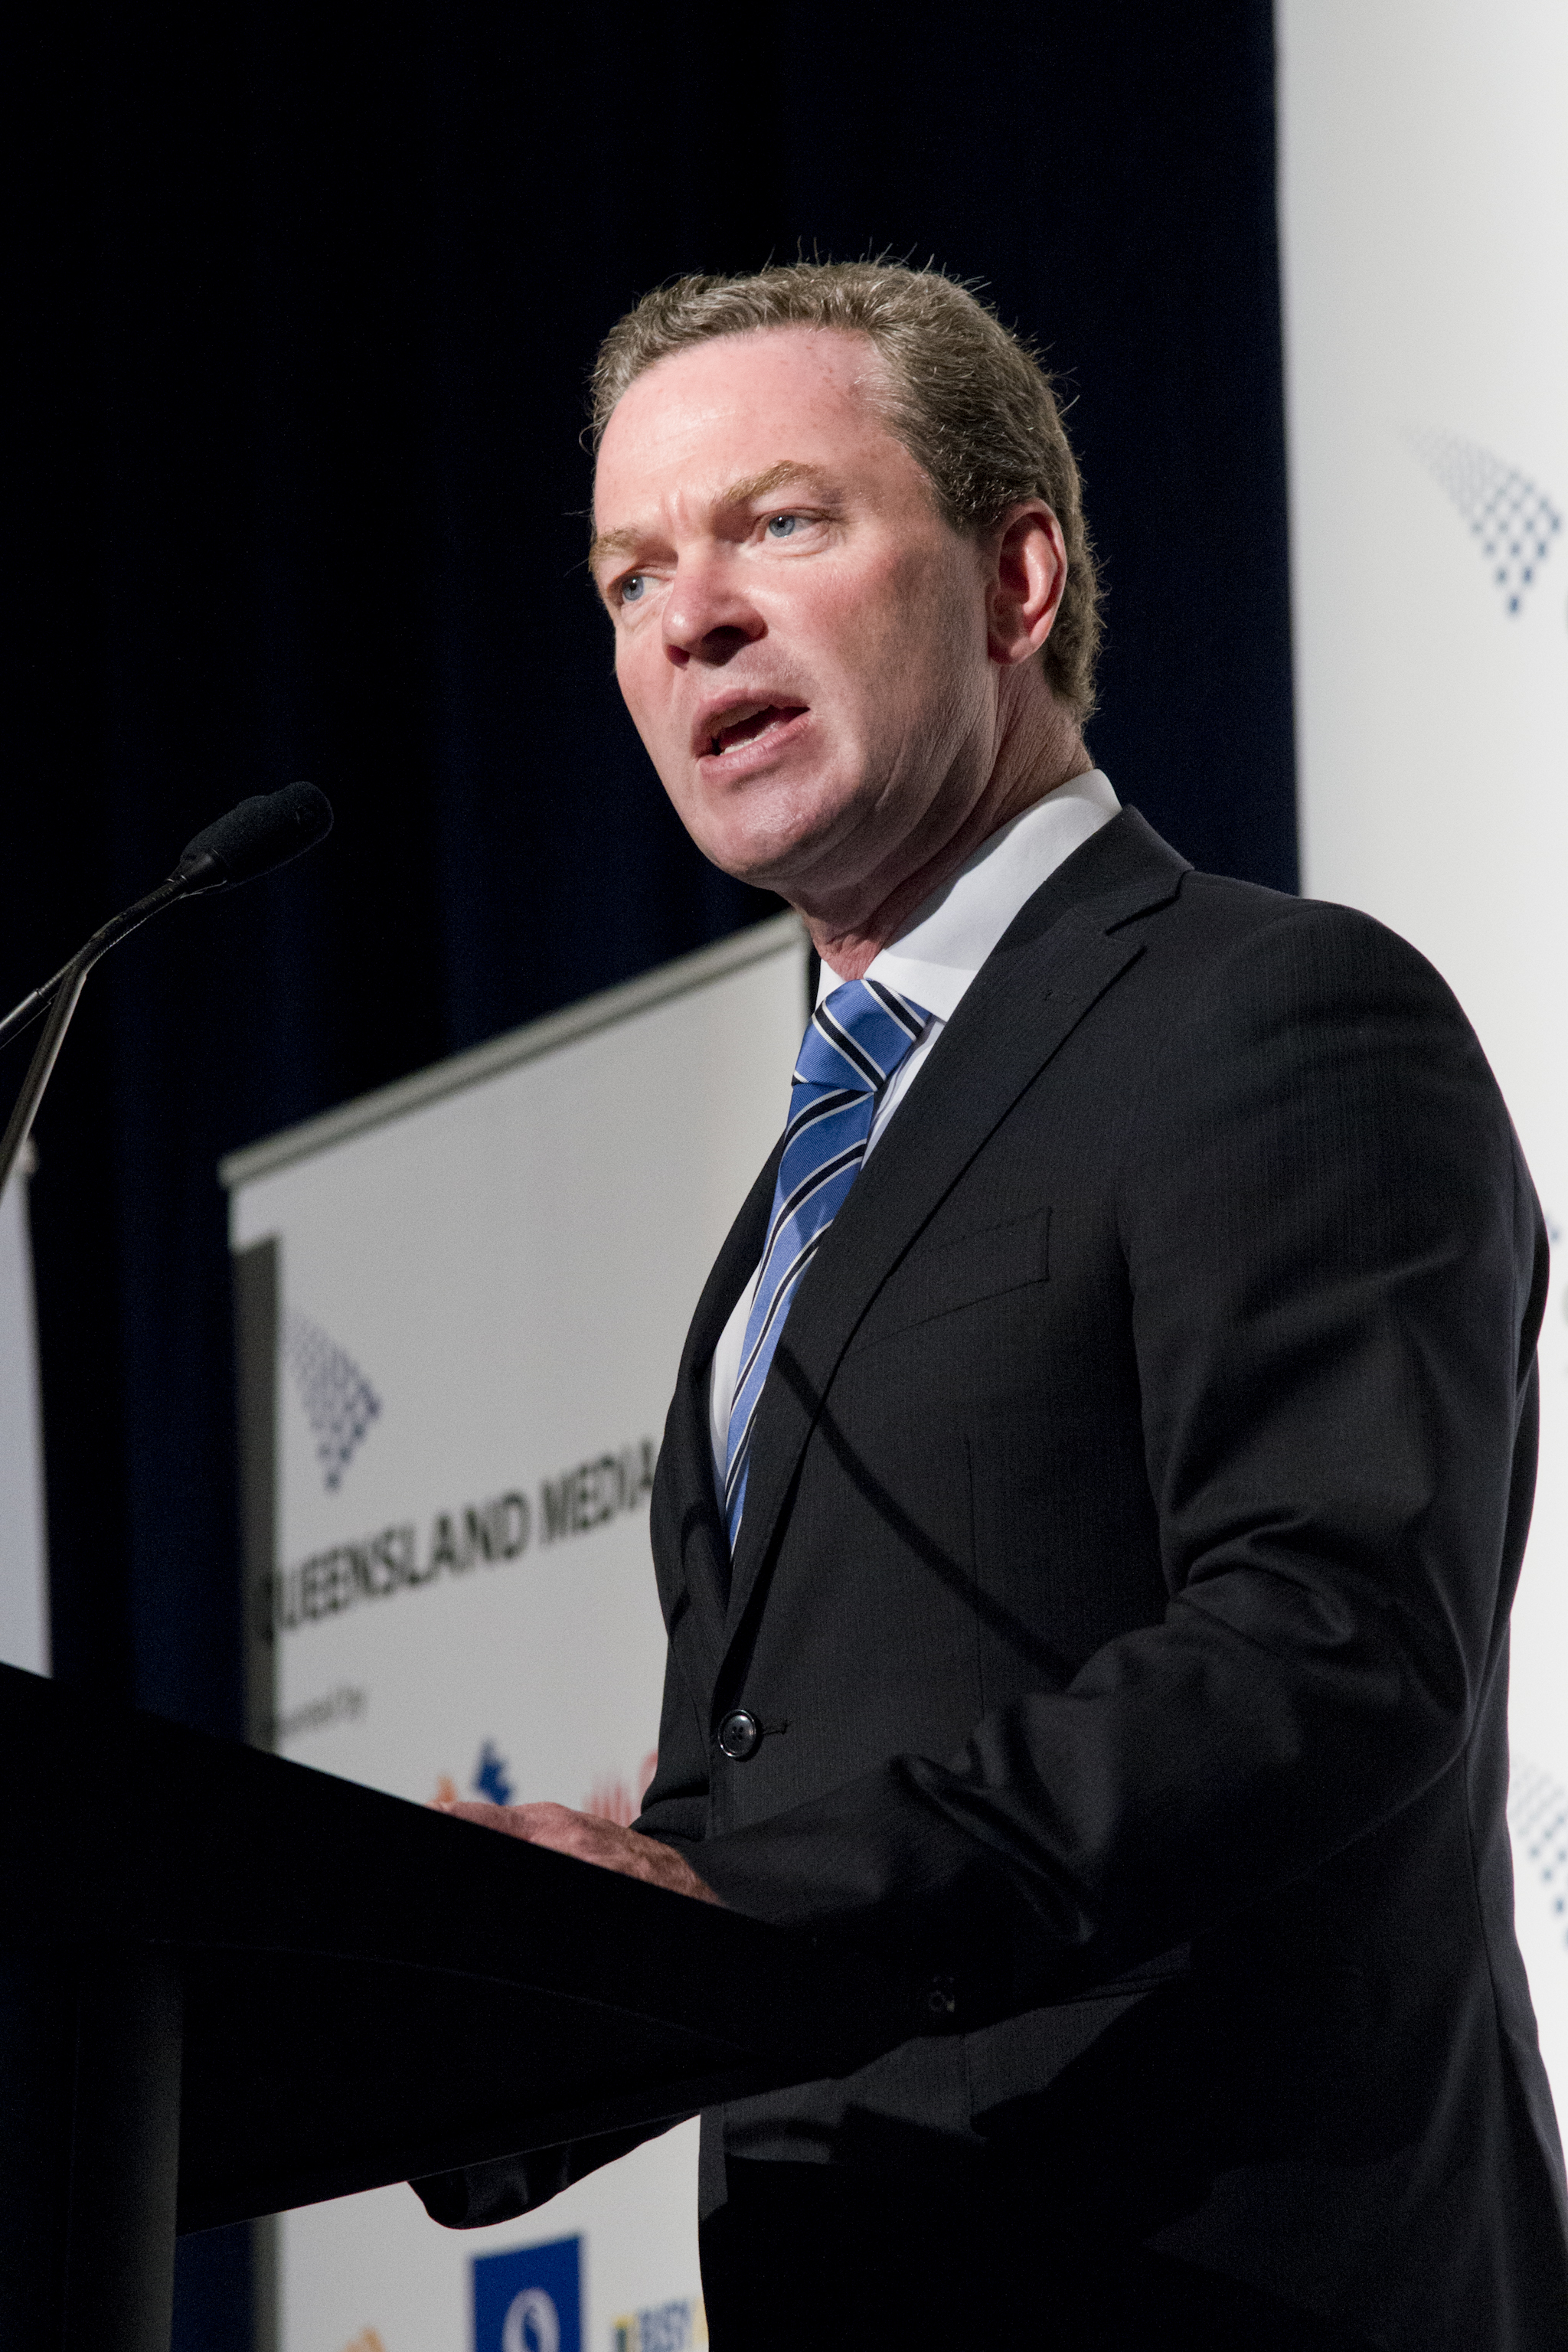 Education Minister Christopher Pyne speaking at a lectern